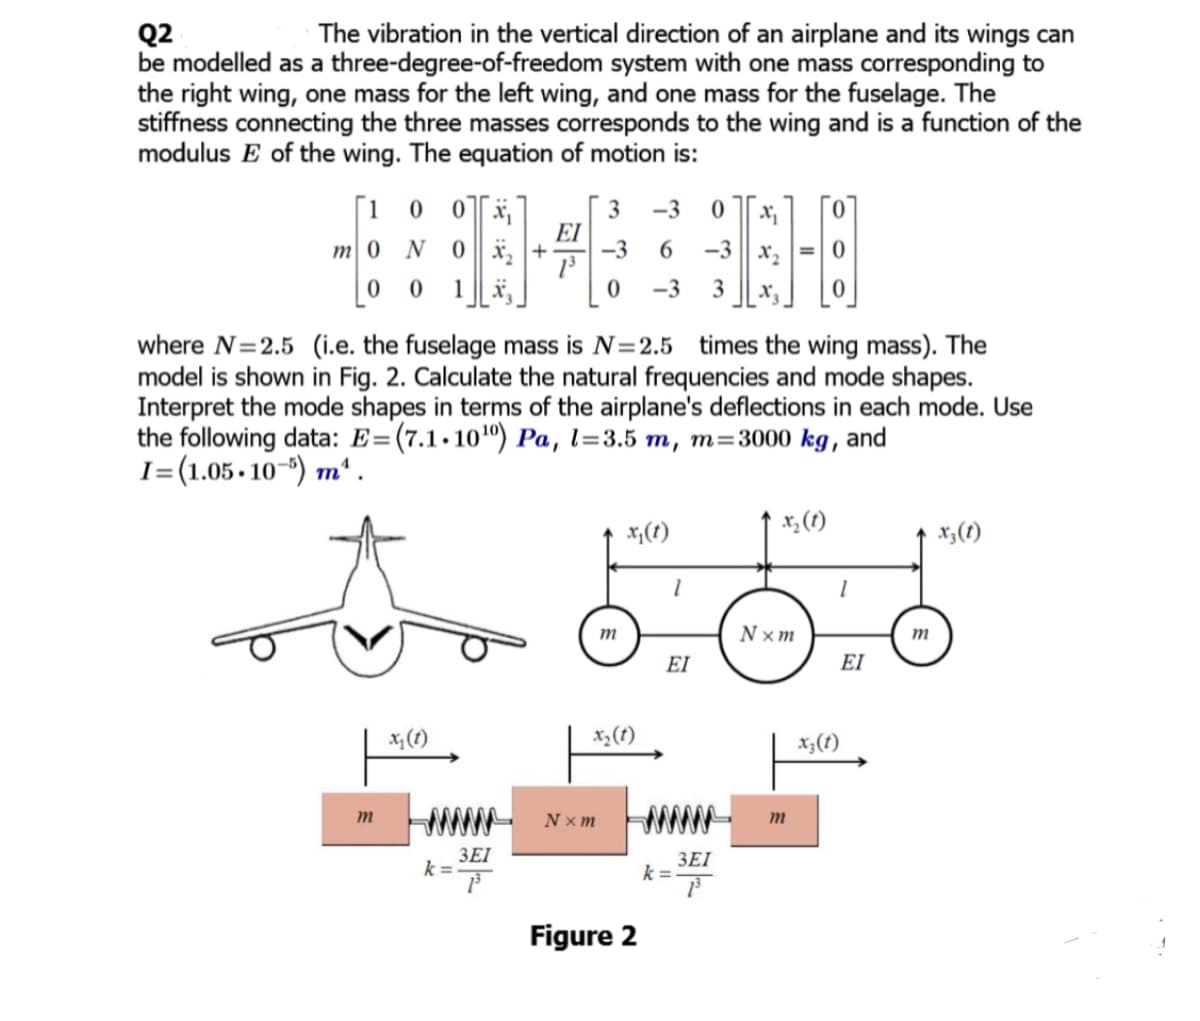 Q2
The vibration in the vertical direction of an airplane and its wings can
be modelled as a three-degree-of-freedom system with one mass corresponding to
the right wing, one mass for the left wing, and one mass for the fuselage. The
stiffness connecting the three masses corresponds to the wing and is a function of the
modulus E of the wing. The equation of motion is:
[1 0 0x₁
m 0 N 0₂ +
0 0 1₂
m
xy (1)
EI
where N=2.5 (i.e. the fuselage mass is N=2.5 times the wing mass). The
model is shown in Fig. 2. Calculate the natural frequencies and mode shapes.
Interpret the mode shapes in terms of the airplane's deflections in each mode. Use
the following data: E=(7.1.10¹0) Pa, l=3.5 m, m=3000 kg, and
I= (1.05.10-5) m¹.
3EI
k=
3 -3 0
-3 6 -3
0 -3 3
Nxm
منه
Figure
x₁(t)
x₂
19
ΕΙ
3EI
k= 7³
x₂ (1)
Nxm
m
x₂ (1)
m
x3 (1)